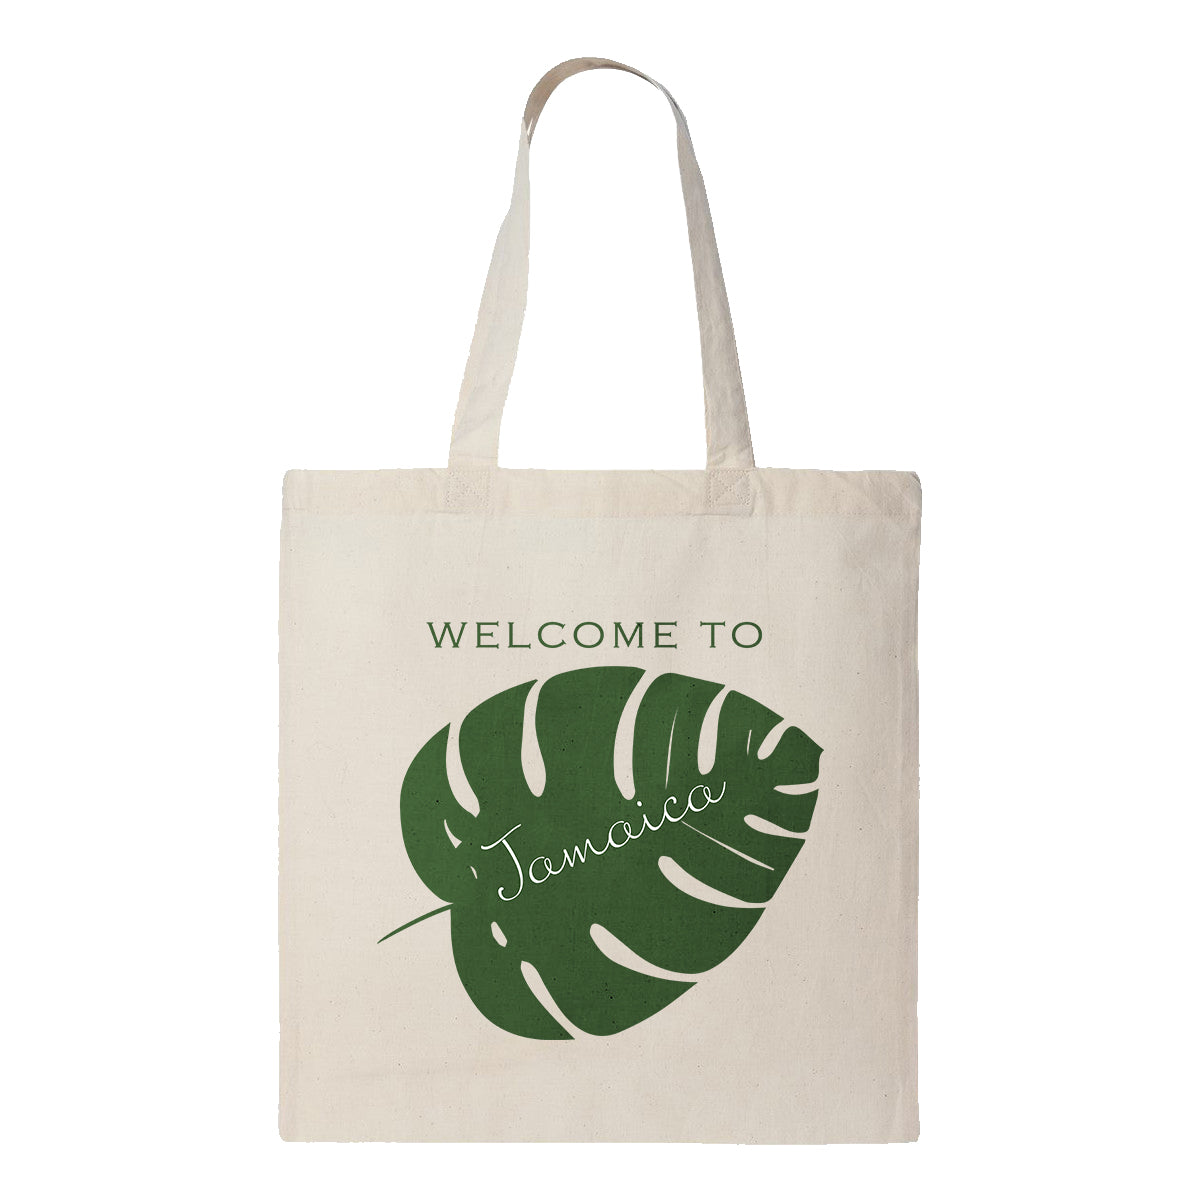 Personalized Destination Wedding Welcome Bags